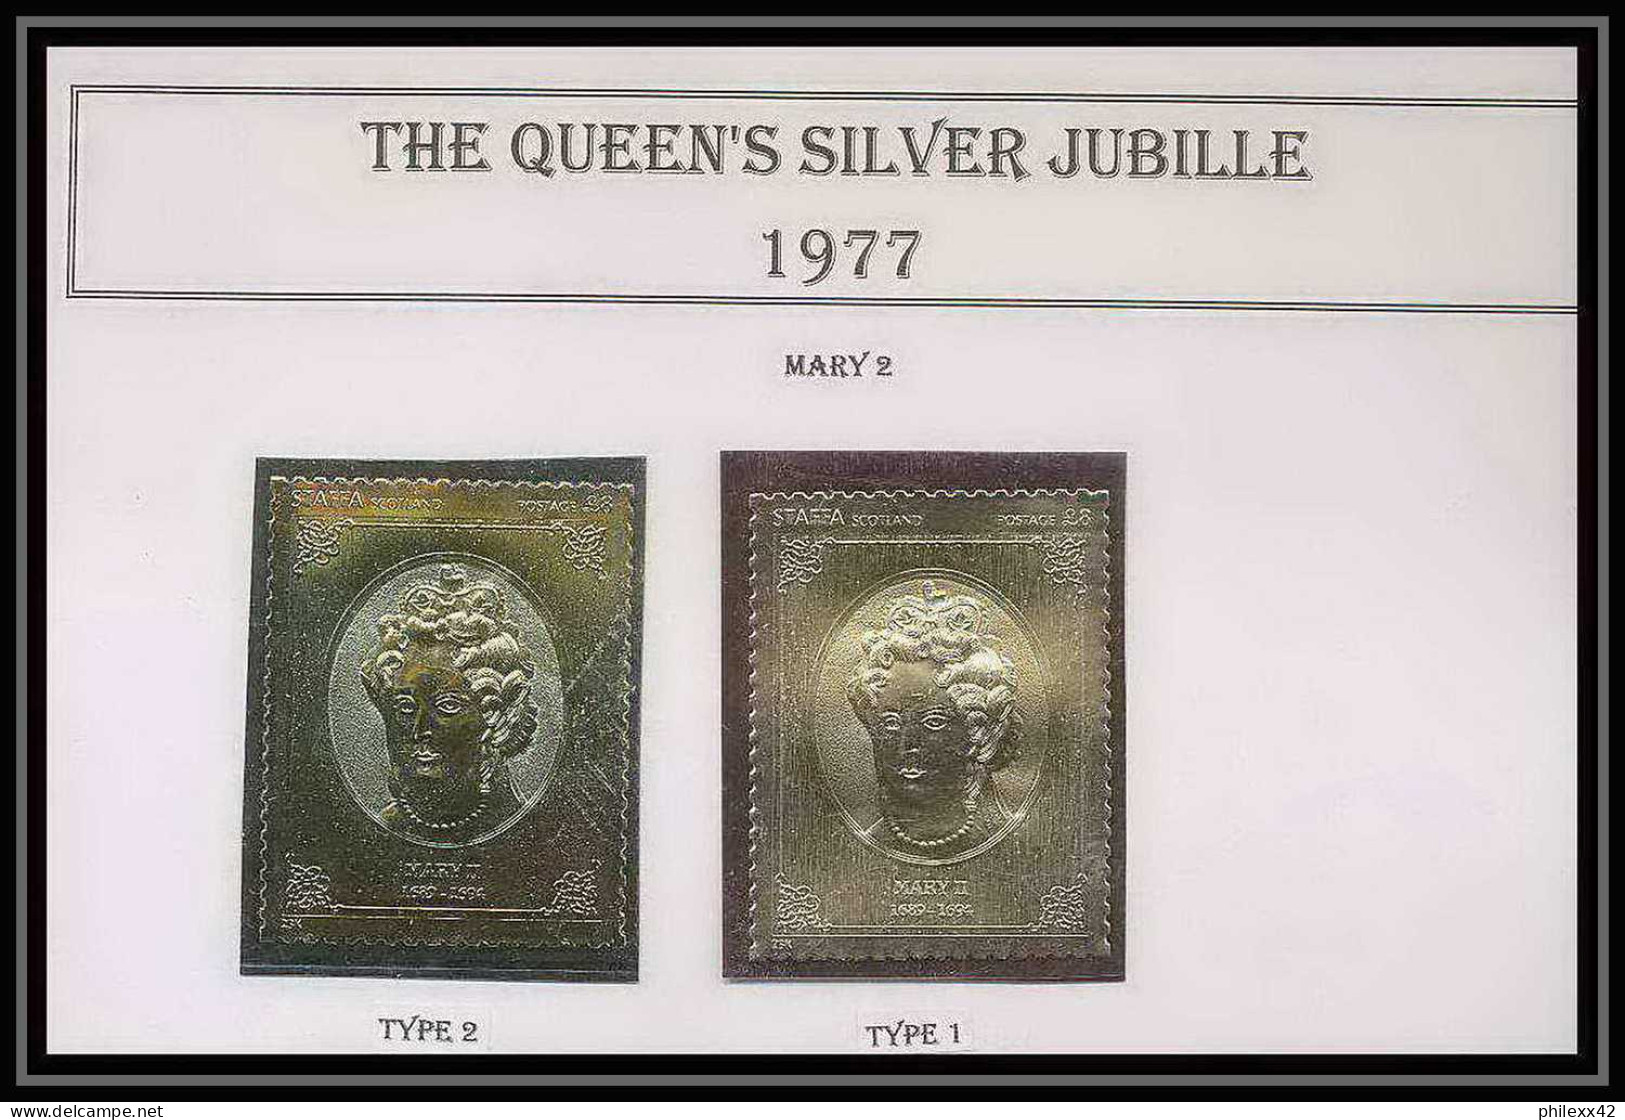 451 Staffa Scotland The Queen's Silver Jubilee 1977 OR Gold Stamps Monarchy United Kingdom Mary 2 Type 1&2 Neuf** Mnh - Scotland